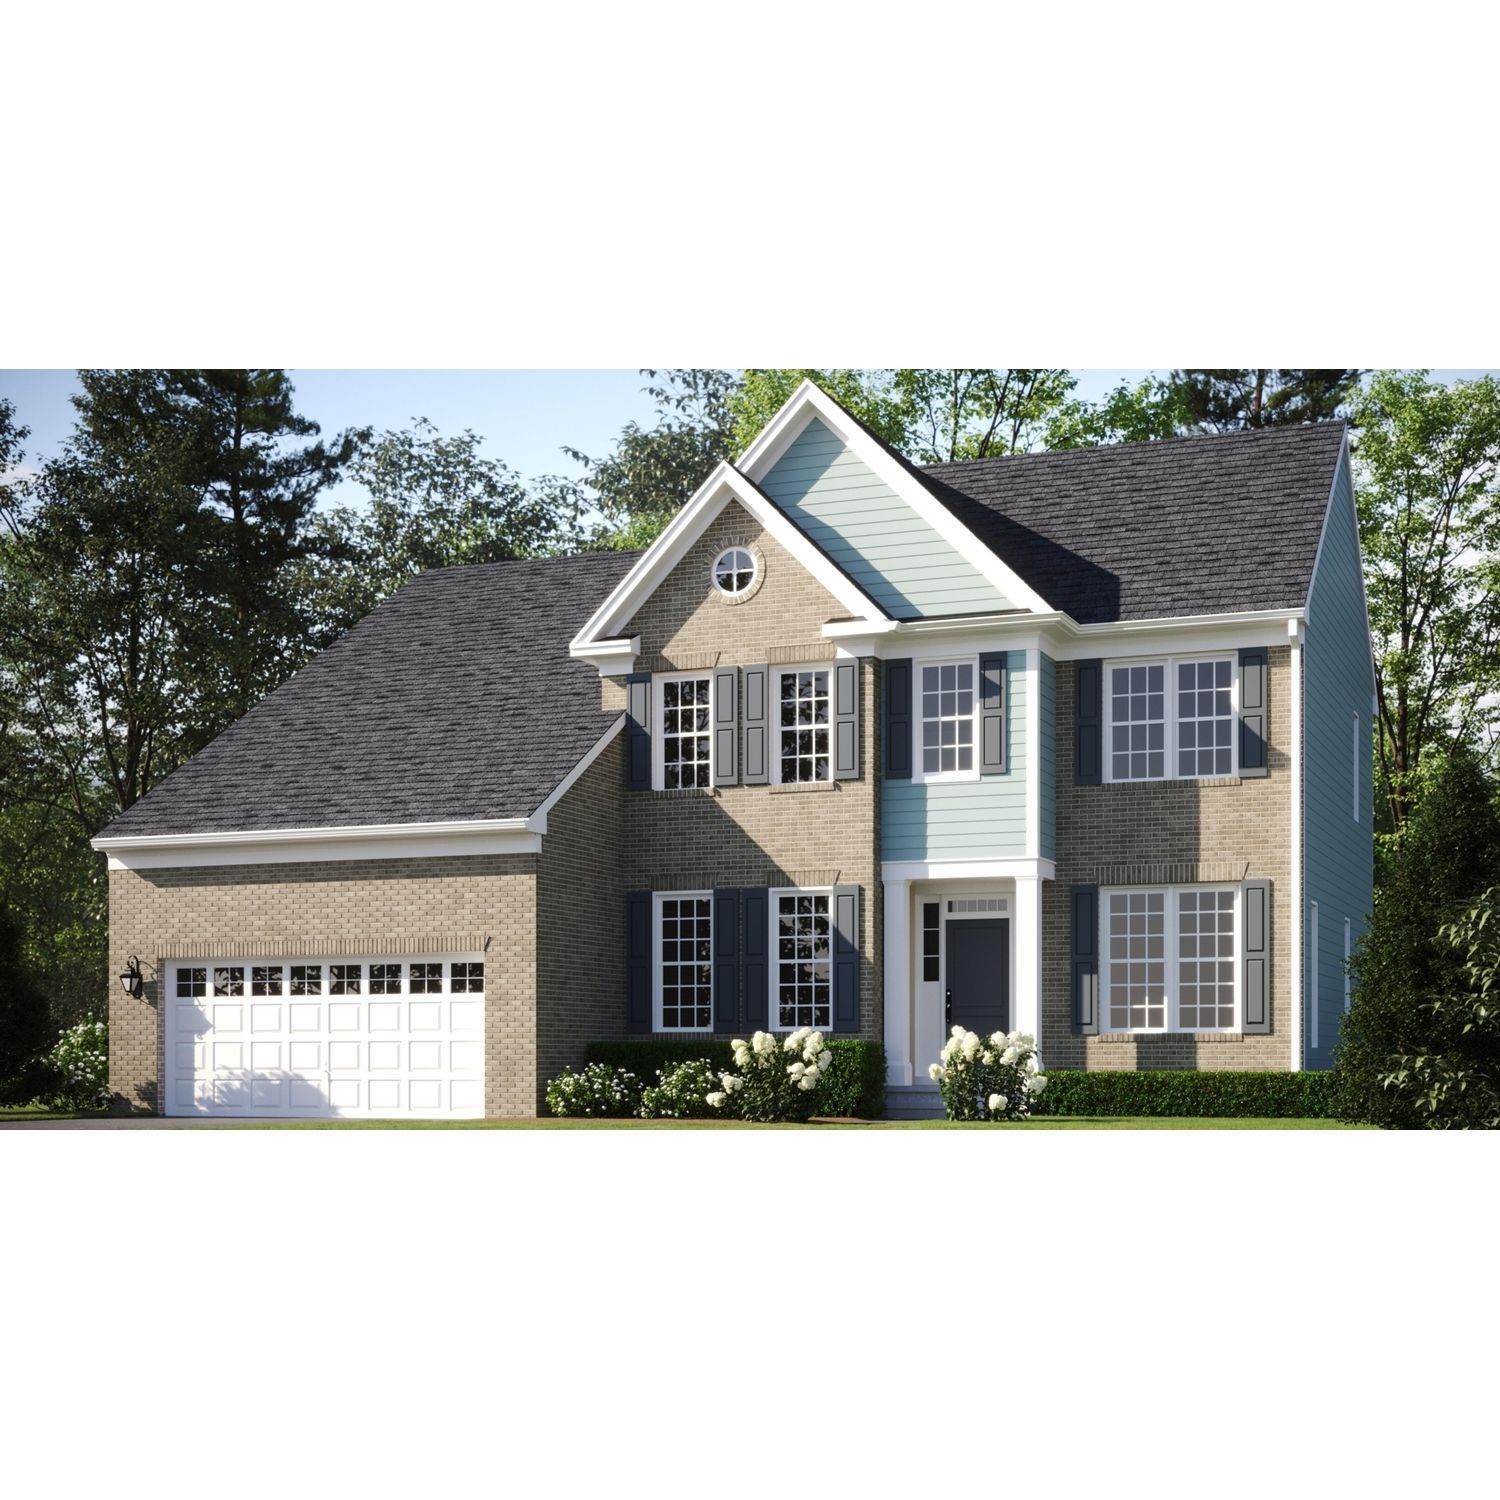 Single Family for Sale at Brandywine, MD 20613